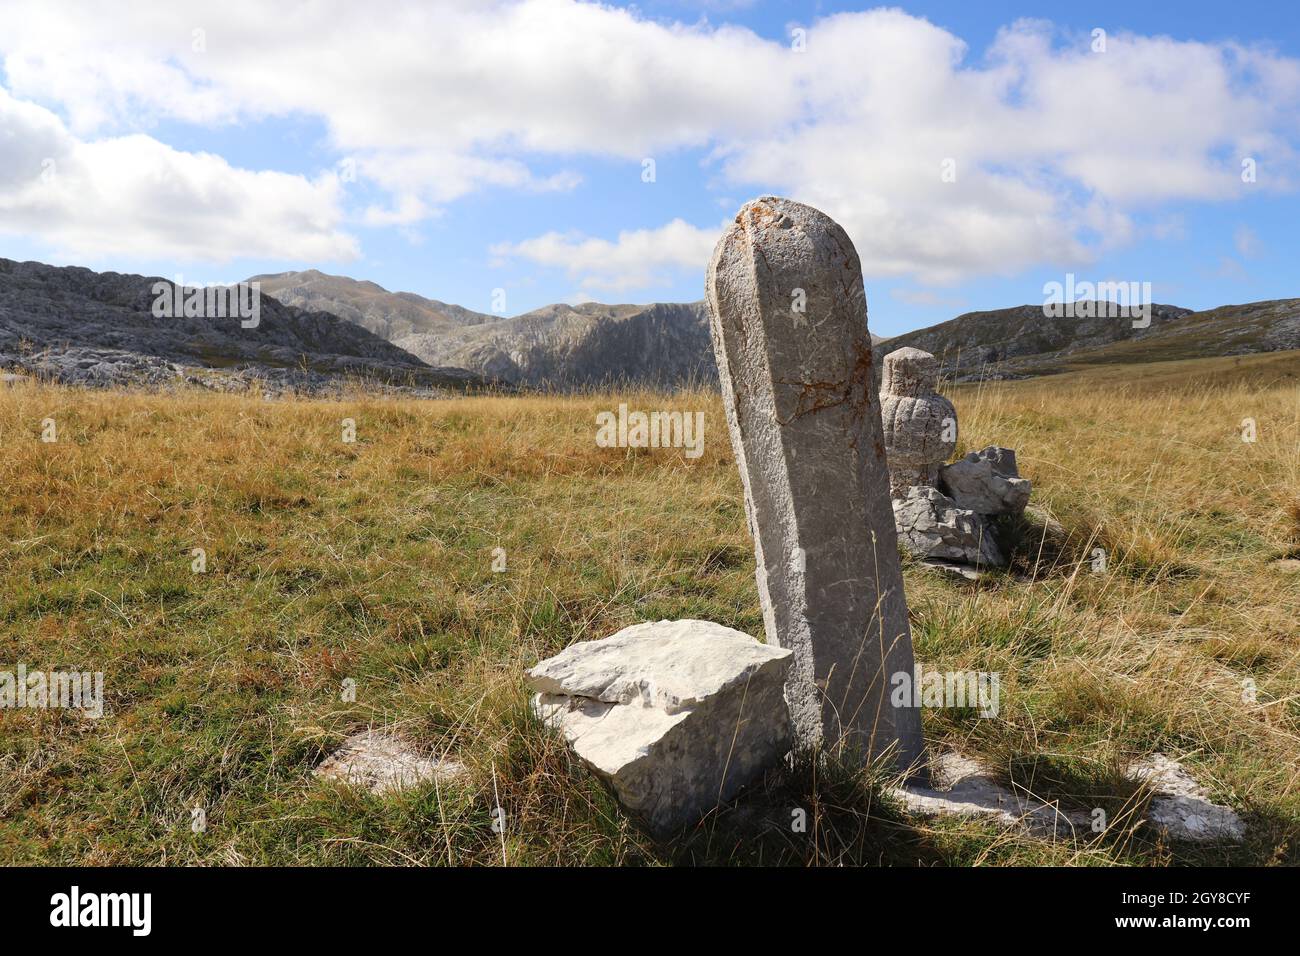 A tombstone in the middle of the Bosnian Highlands Stock Photo